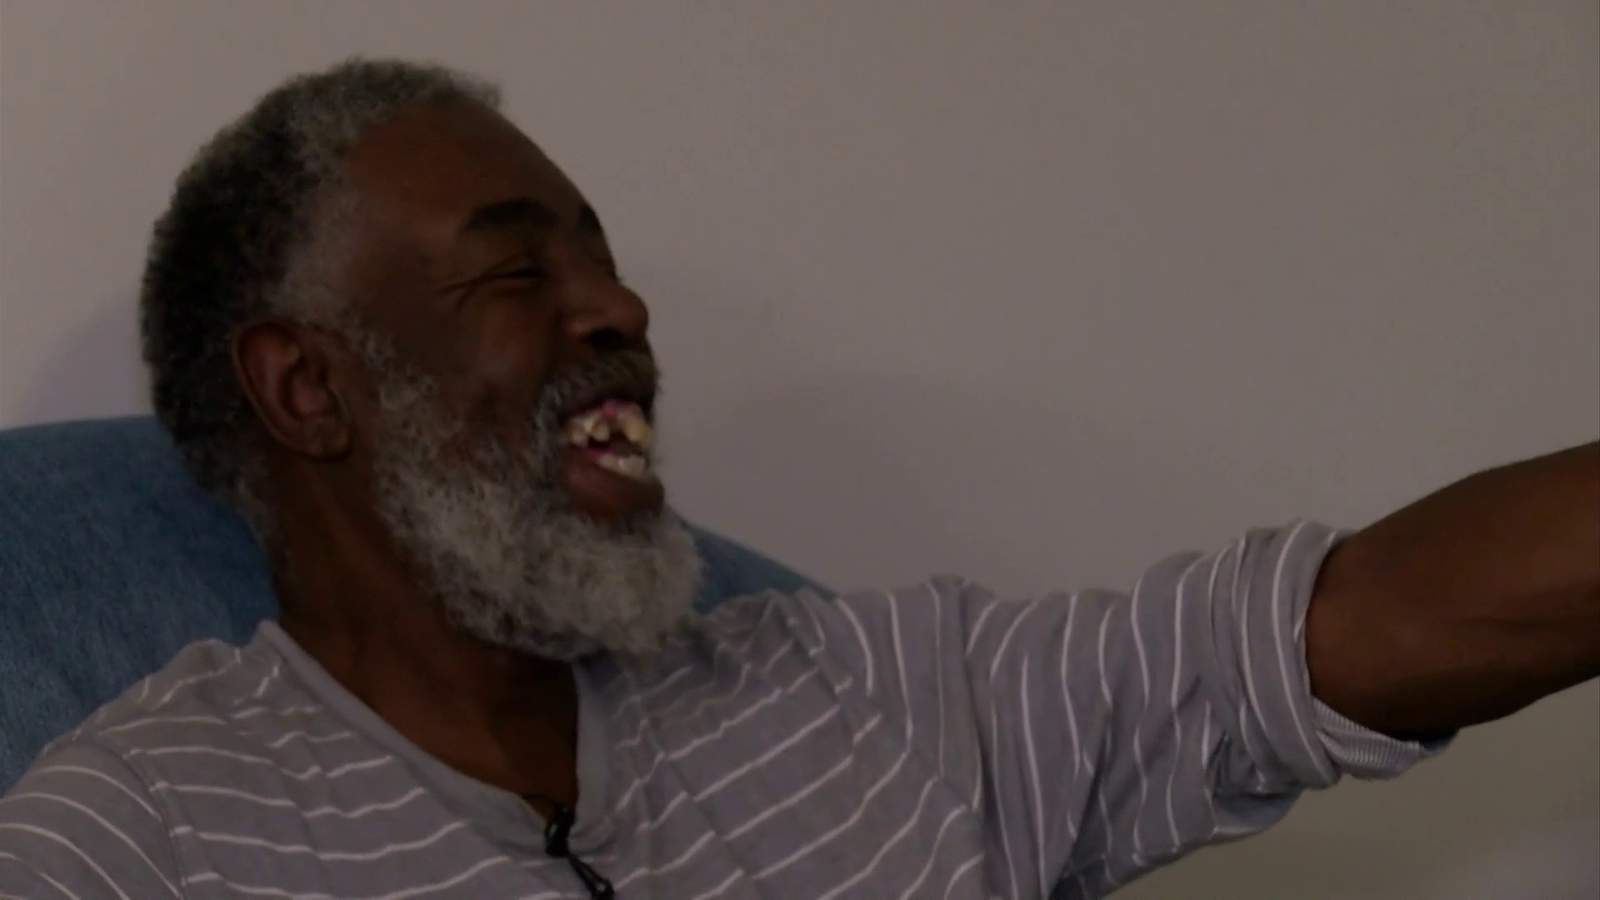 “God said hold on:” Homeless man gets new home after living on the streets for 20 years